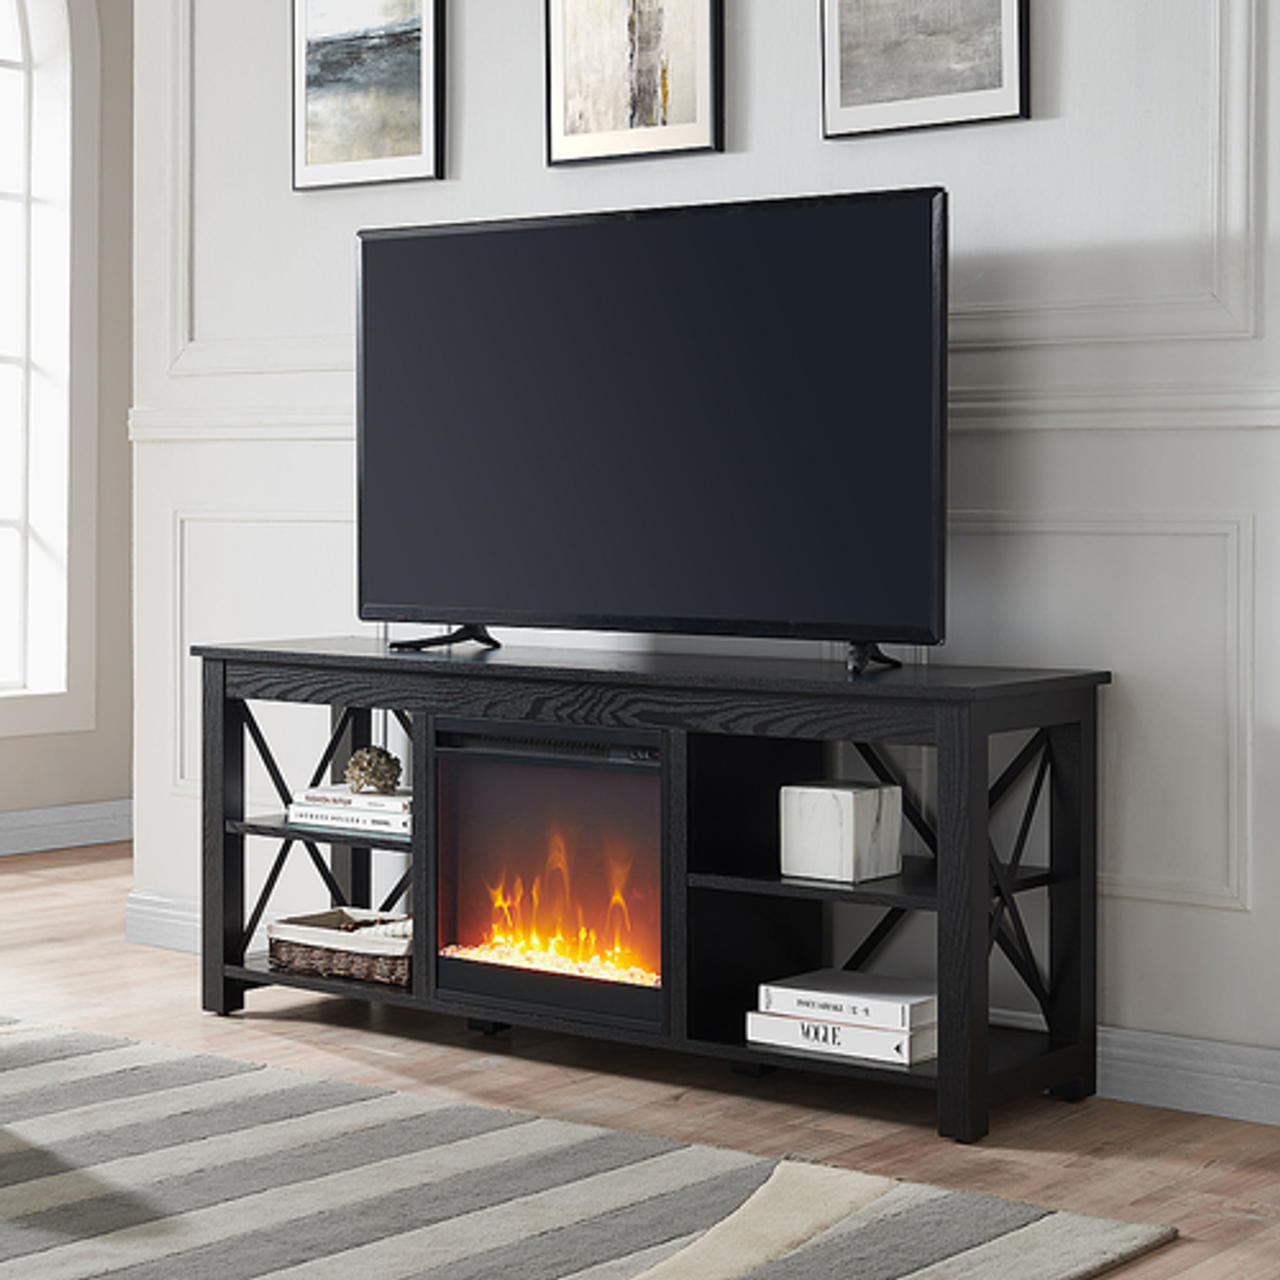 Camden&Wells - Sawyer Crystal Fireplace TV Stand for TVs up to 65" - Black